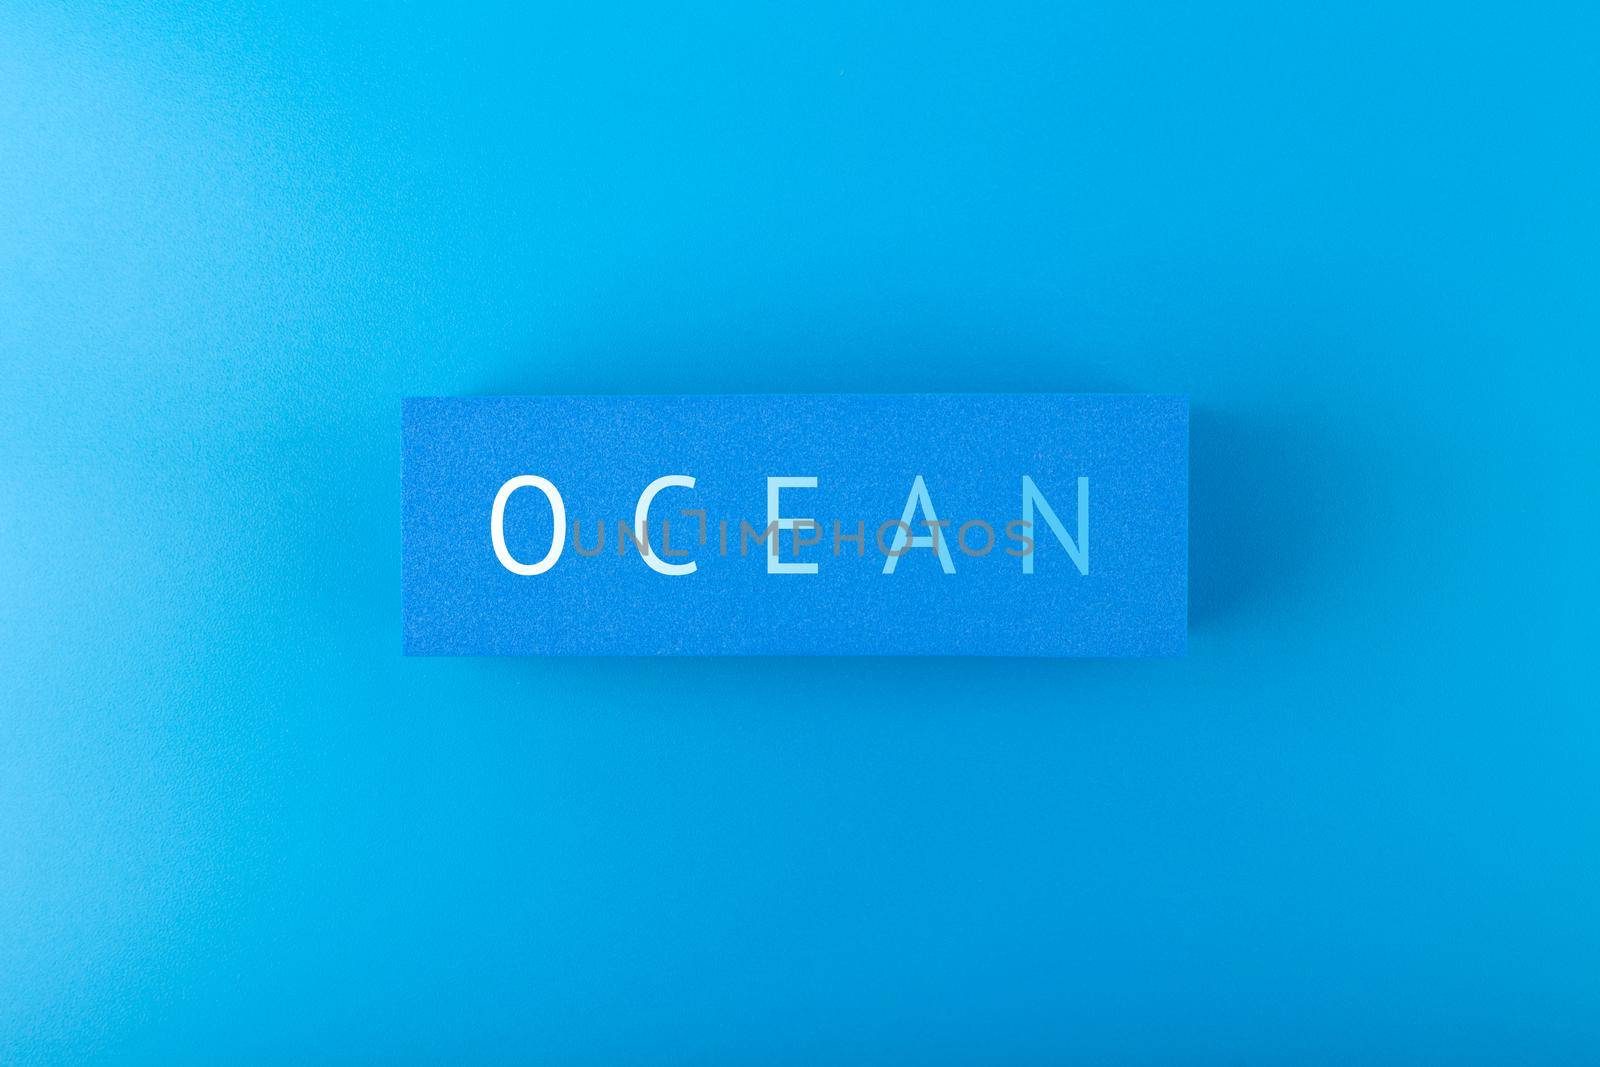 Single word ocean on dark blue background with gradient. Concept of ocean pollution with plastic garbage, ecology poster or Ocean day poster or banner